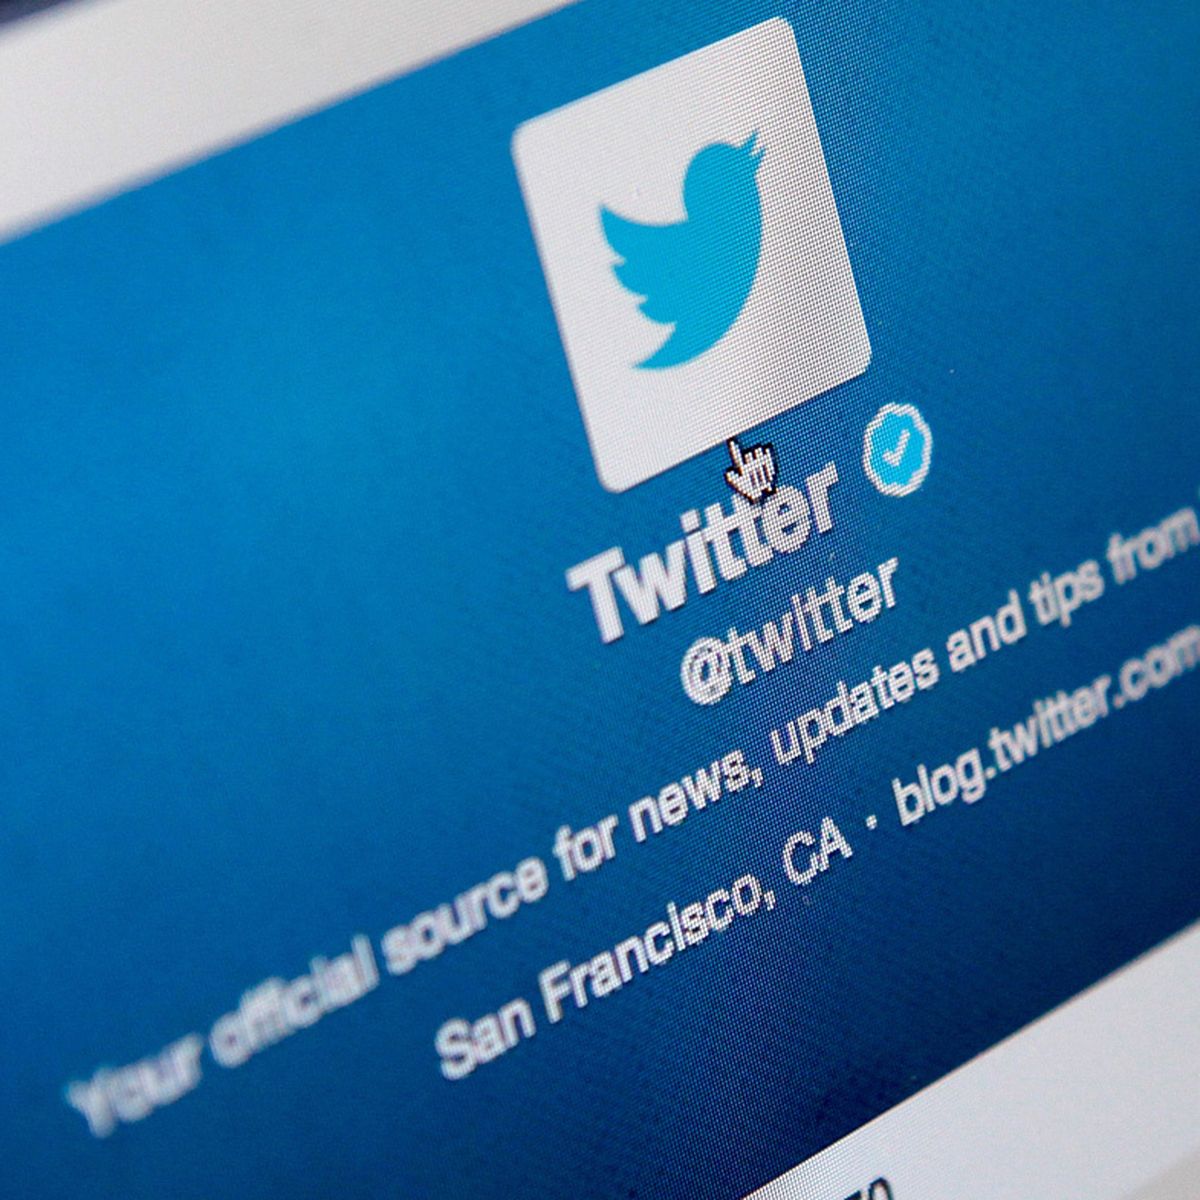 Twitter Blue Tick Verification System To Relaunch This Week Researcher Claims